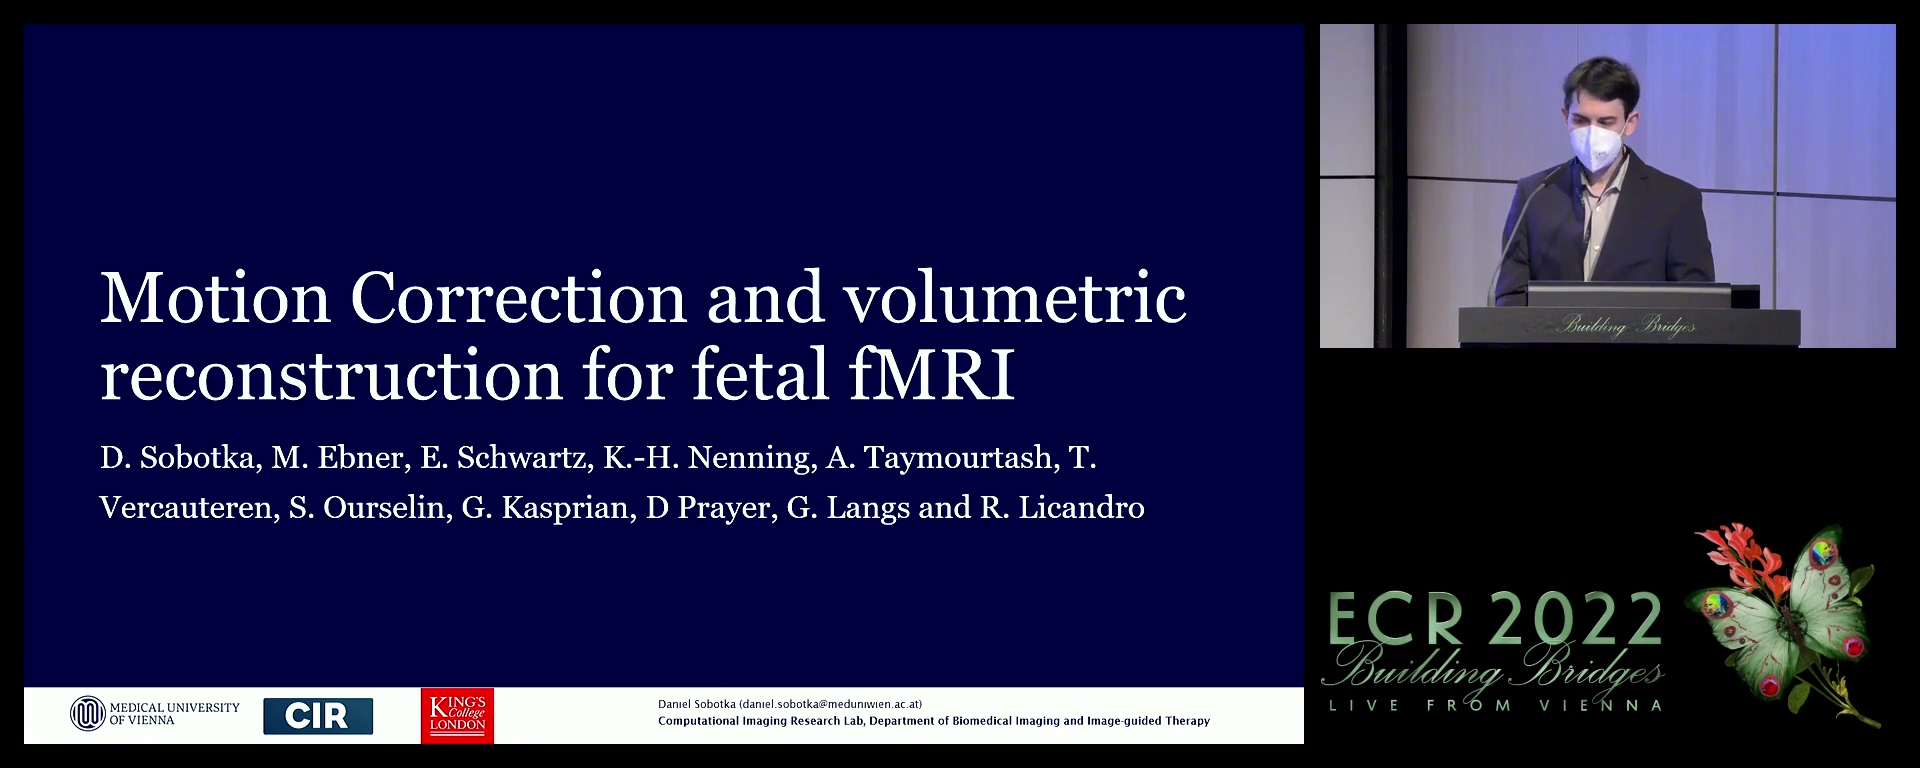 Motion correction and volumetric reconstruction for fetal fMRI - Daniel Sobotka, Vienna / AT